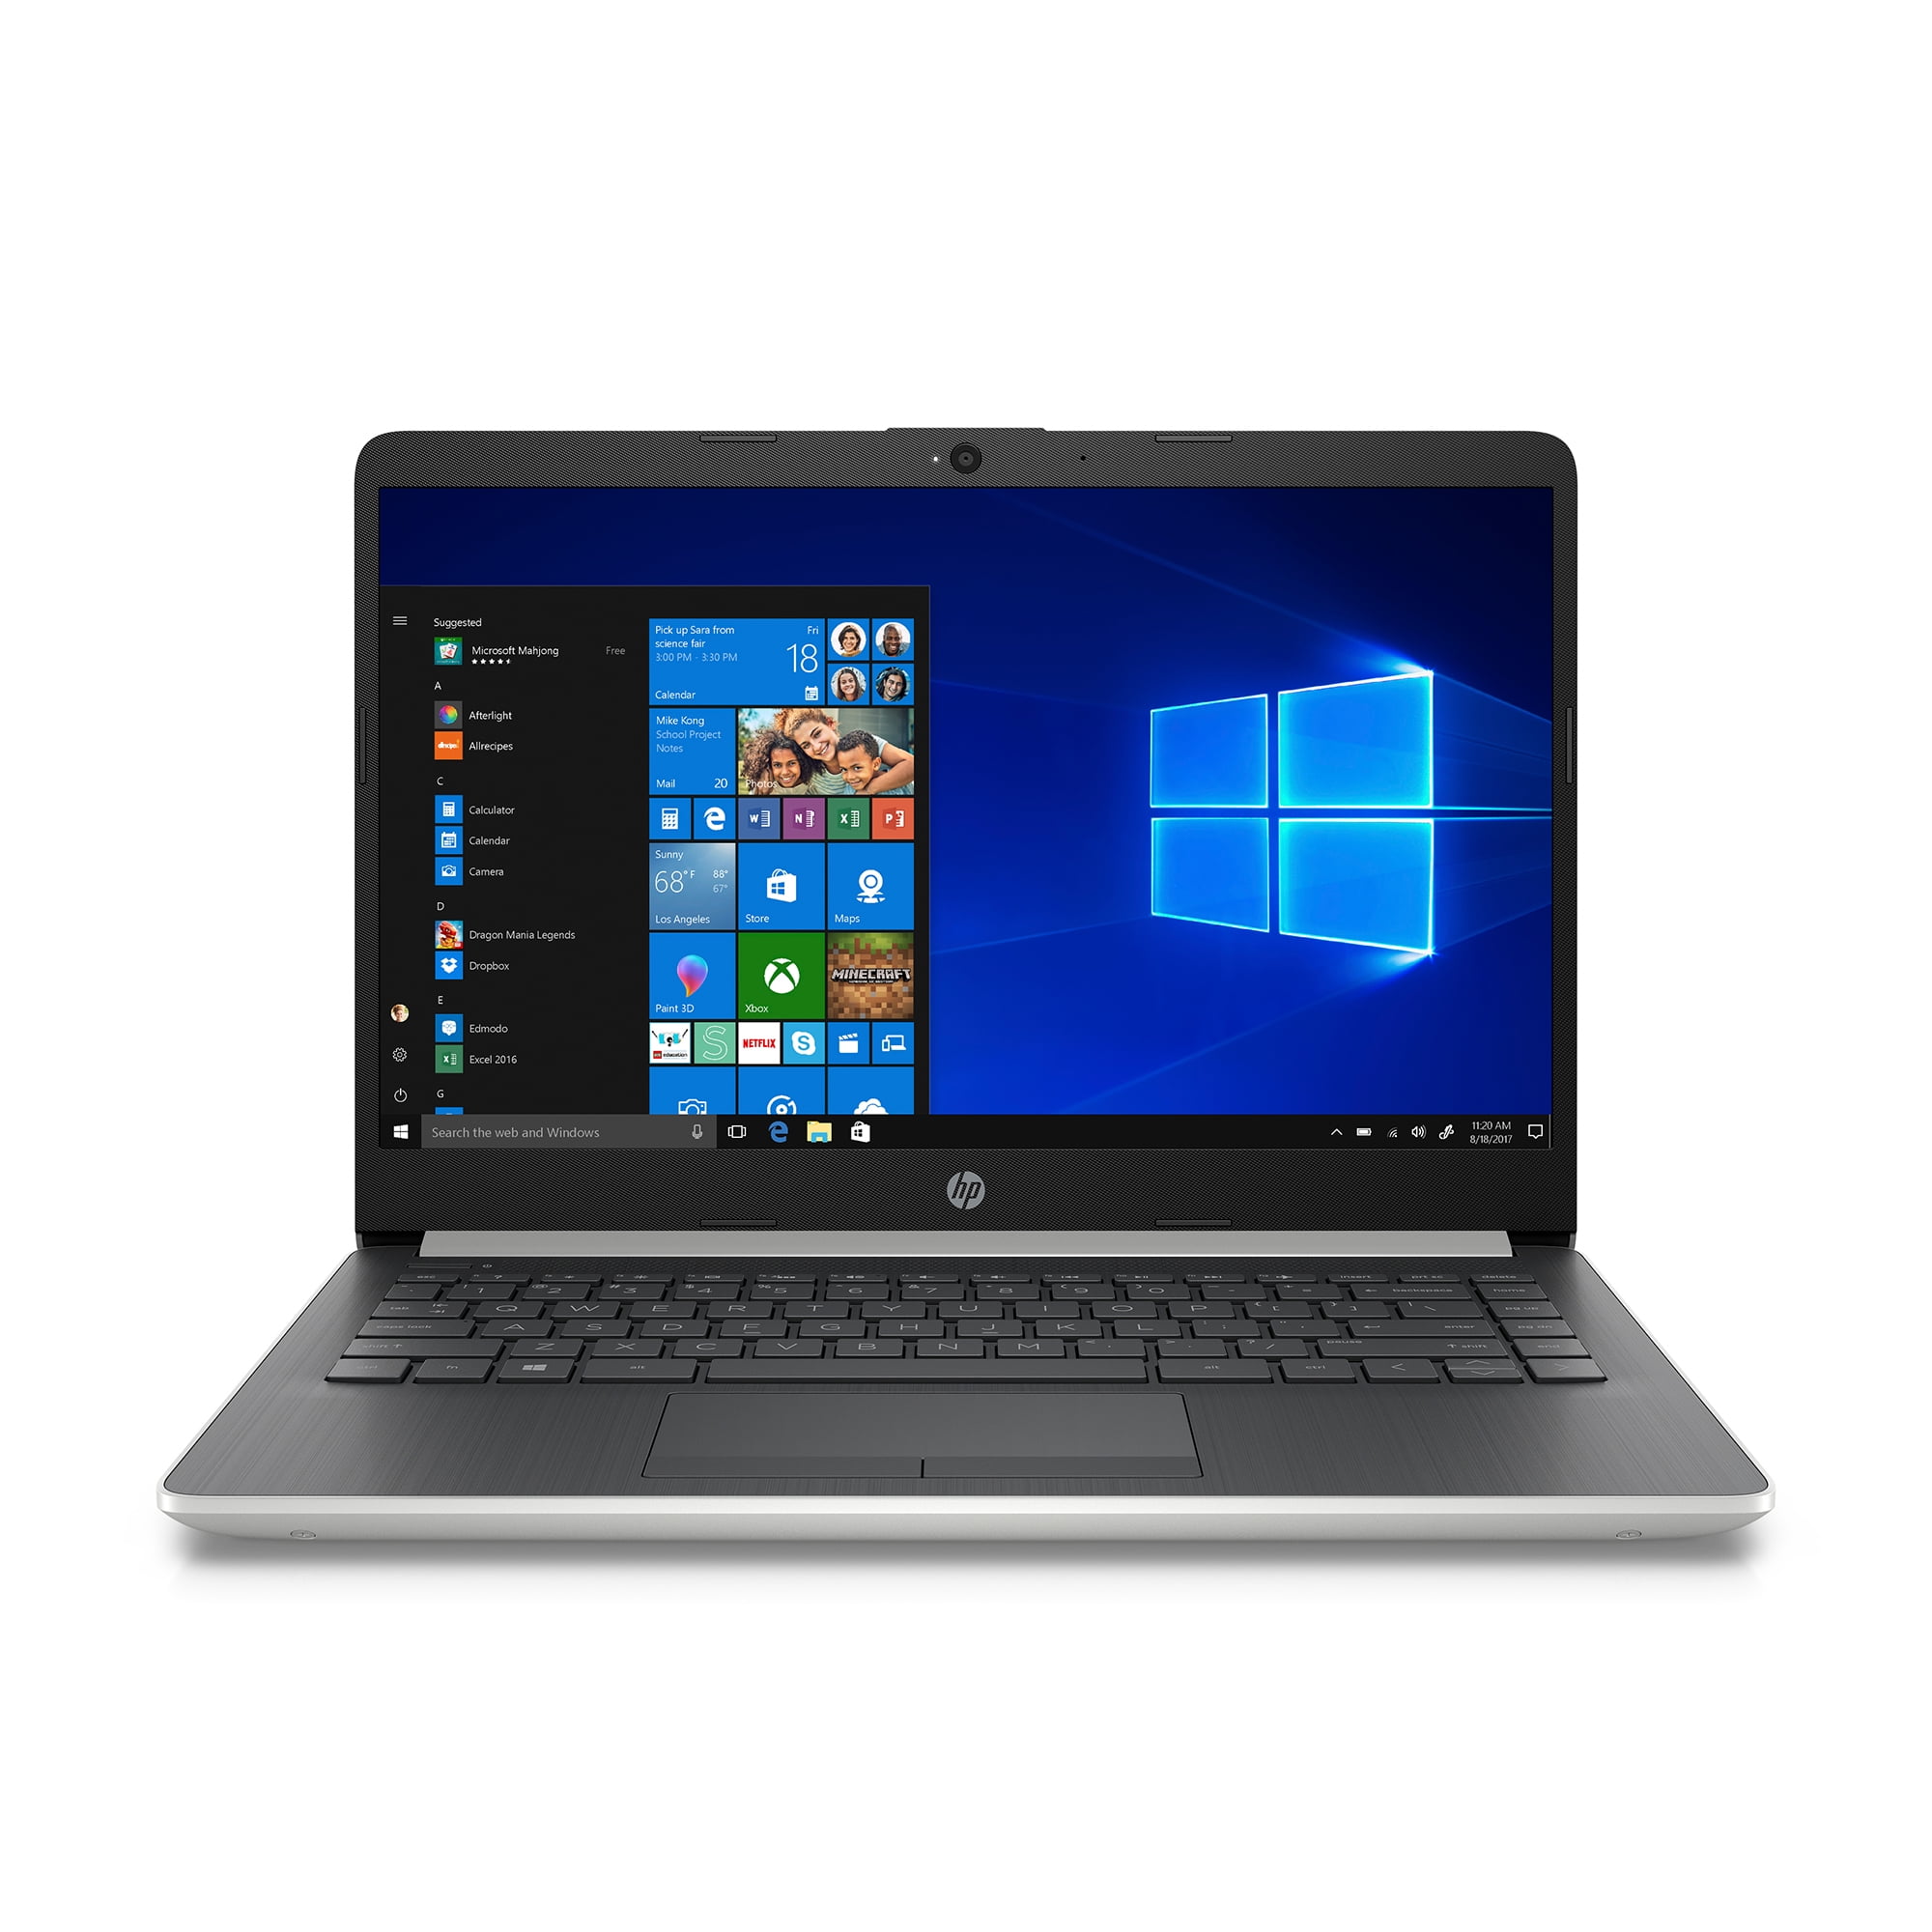 emmer bijl schaal HP 14 Laptop, Intel Celeron N4000, 4GB SDRAM, 64GB eMMC, Office 365  Personal 1-year (A $70 value included for free), Natural Silver -  Walmart.com